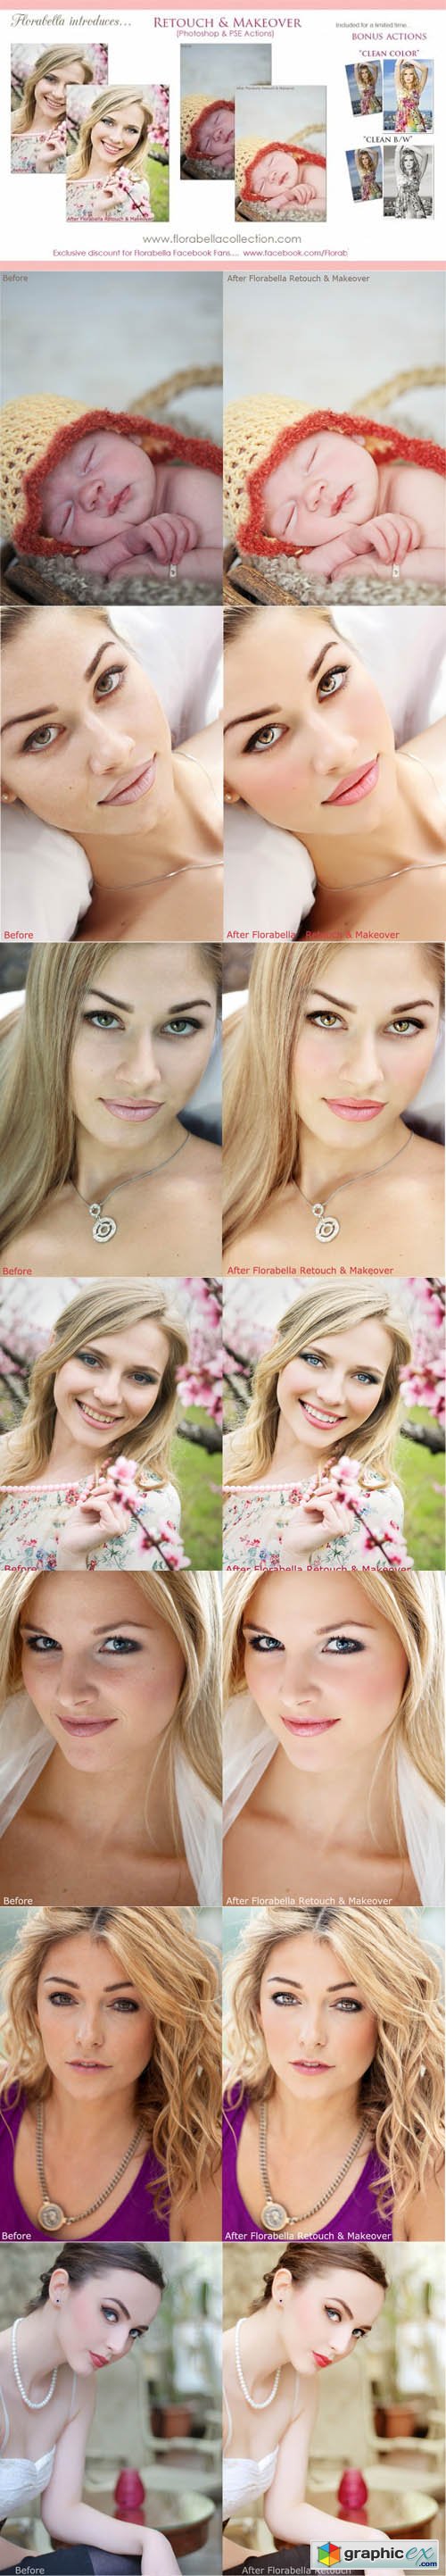 Florabella Collection - Retouch & Makeover Actions